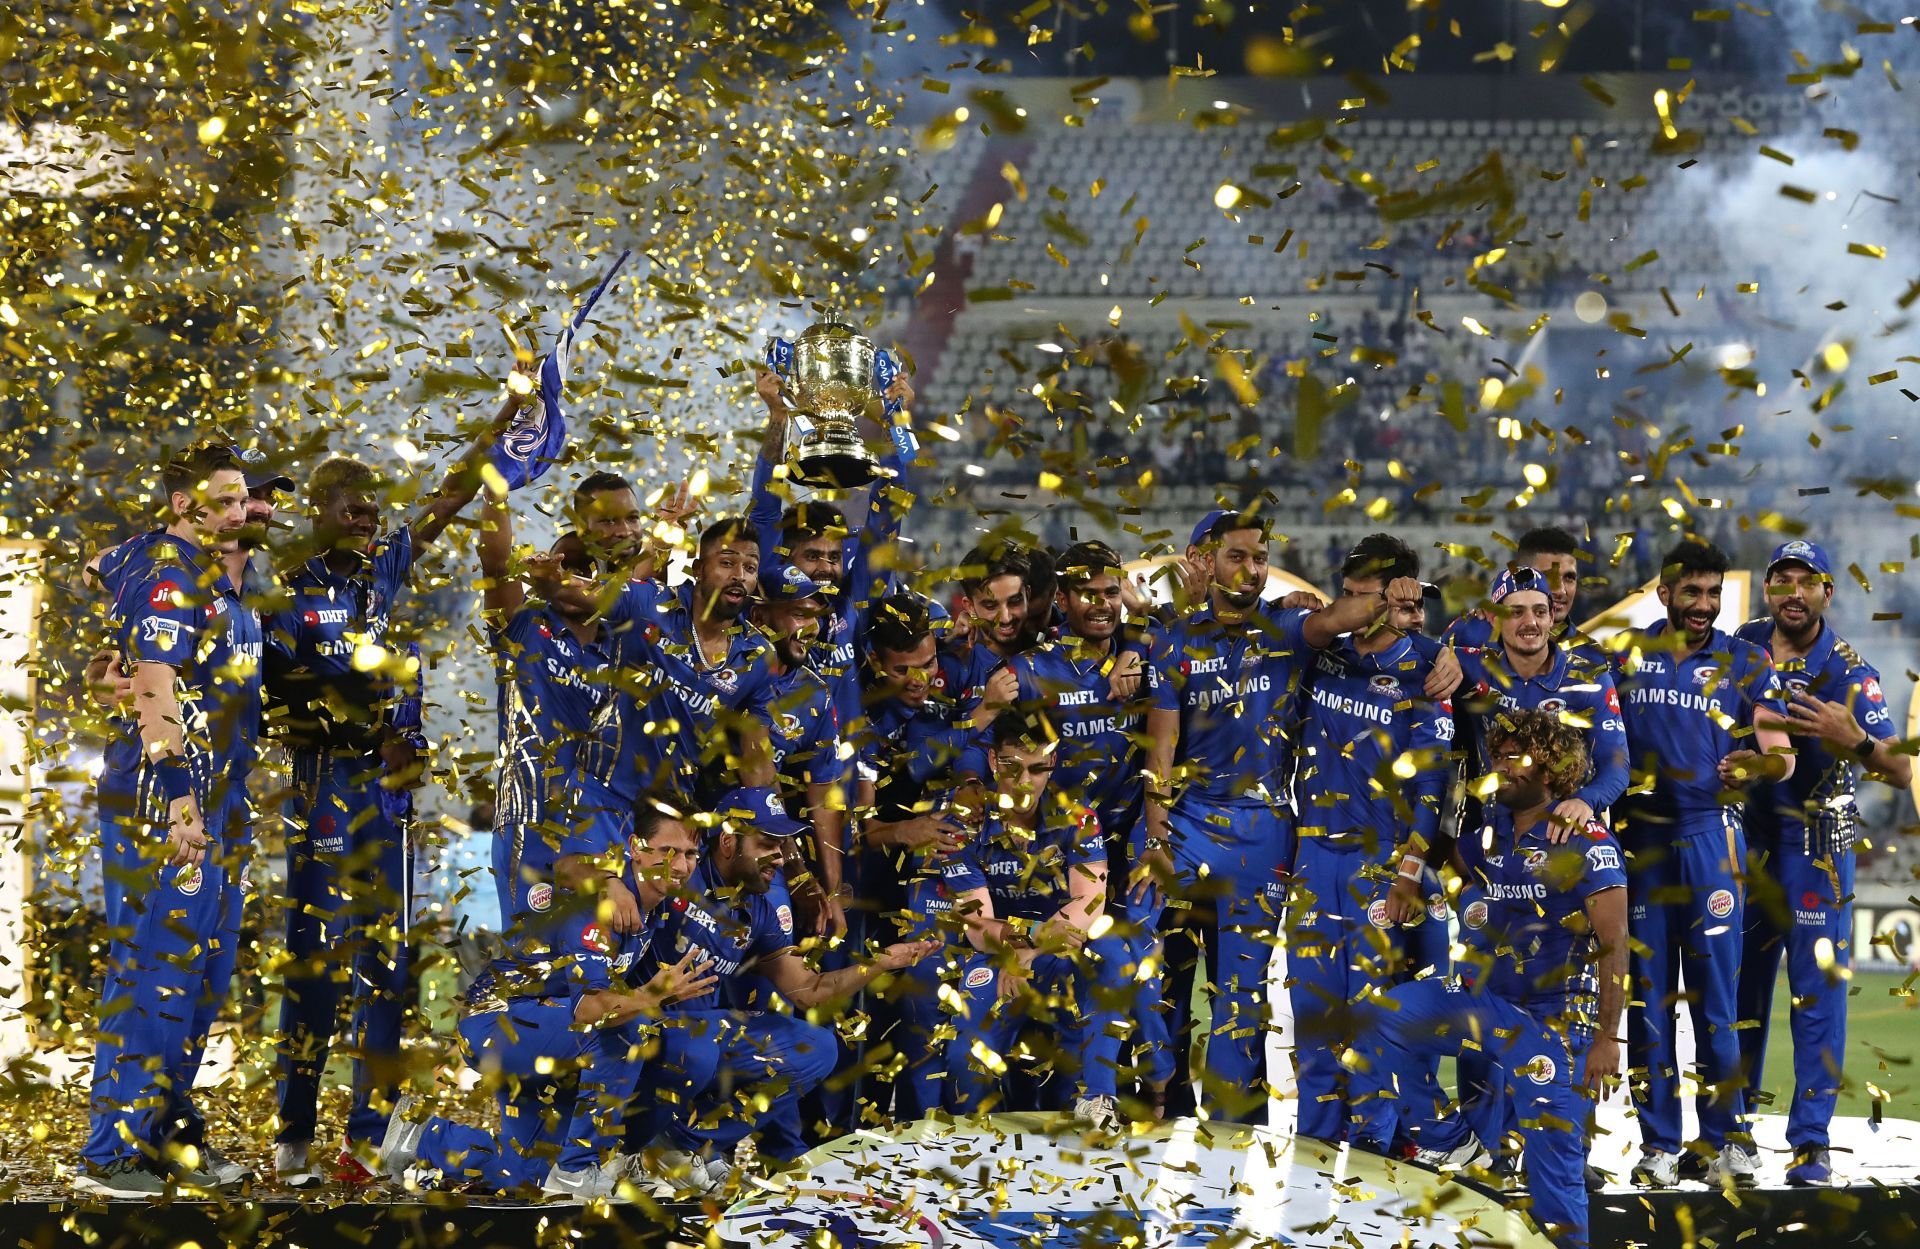 Mumbai Indians are the most successful franchise in IPL history.